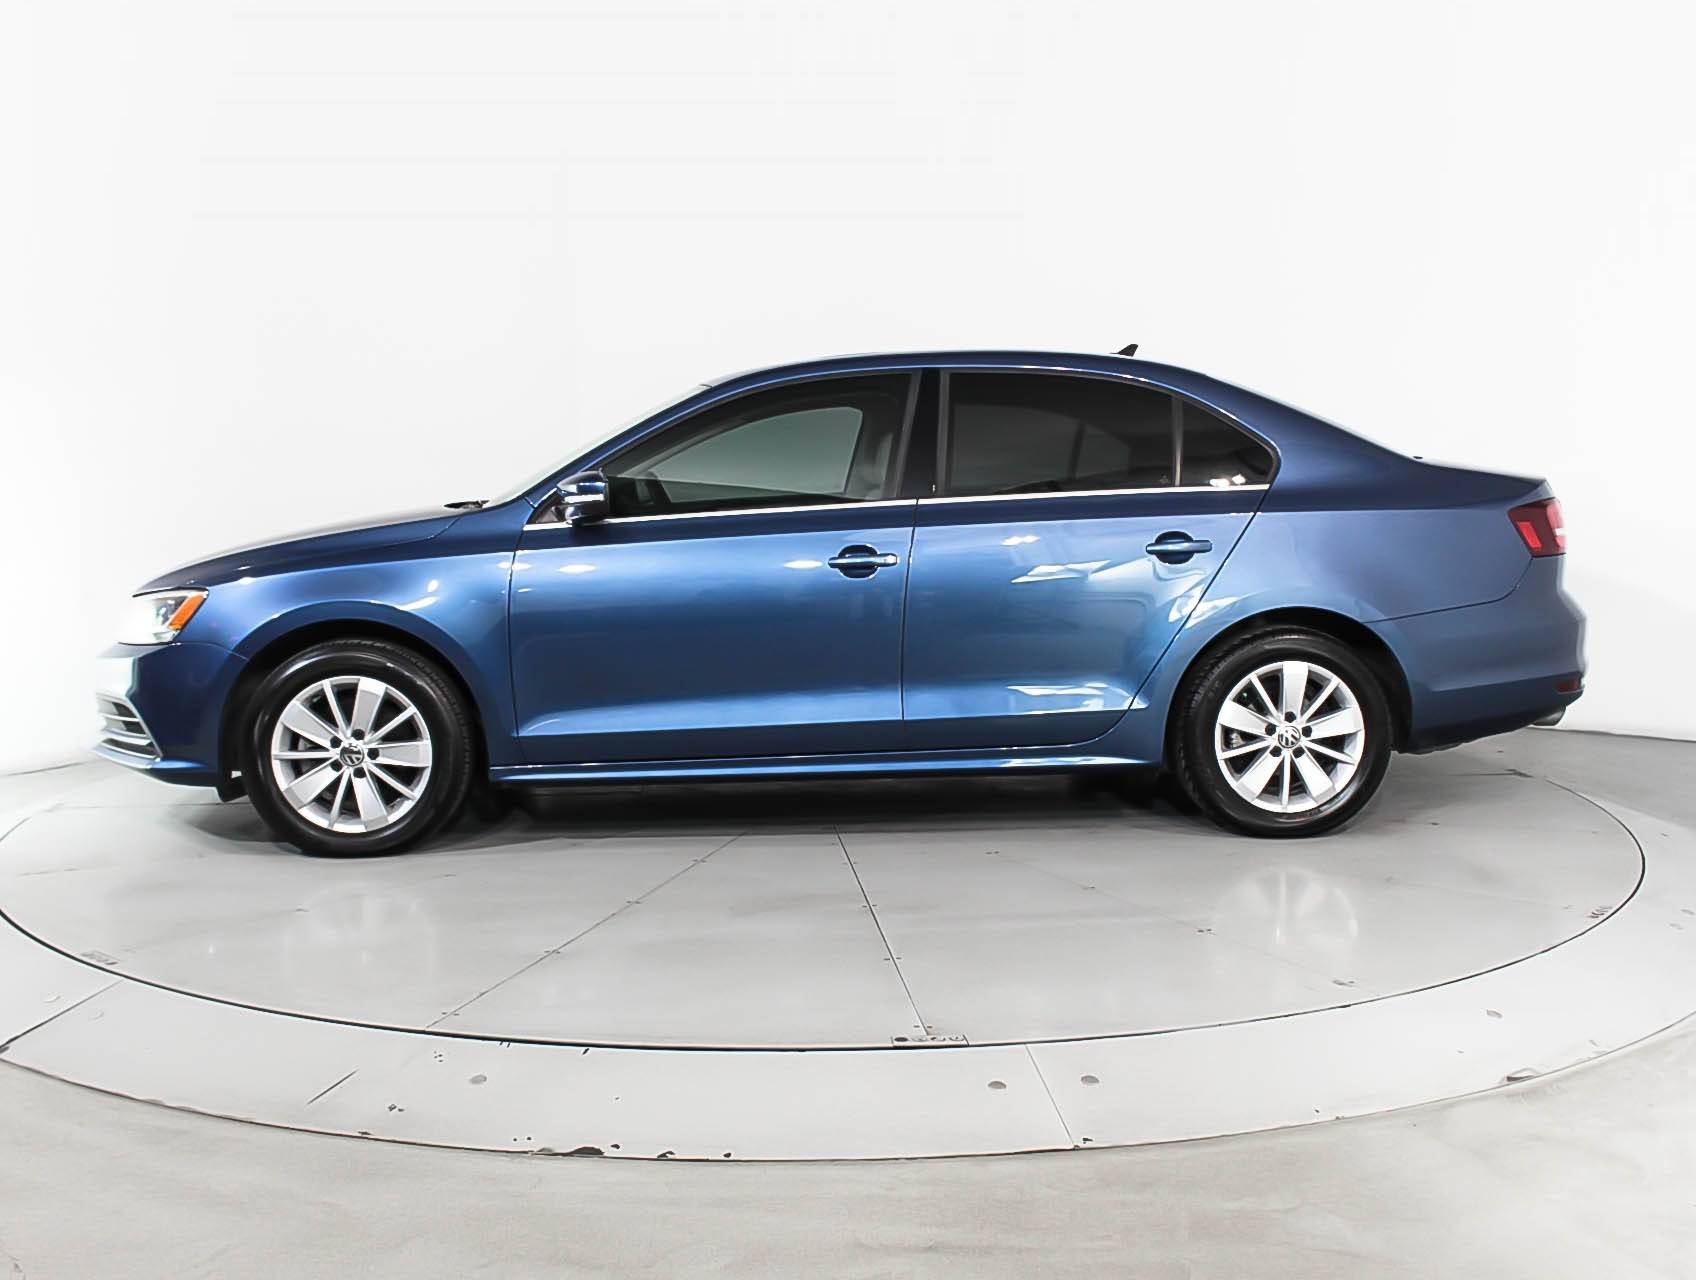 Florida Fine Cars - Used VOLKSWAGEN JETTA 2016 HOLLYWOOD 1.4T SE